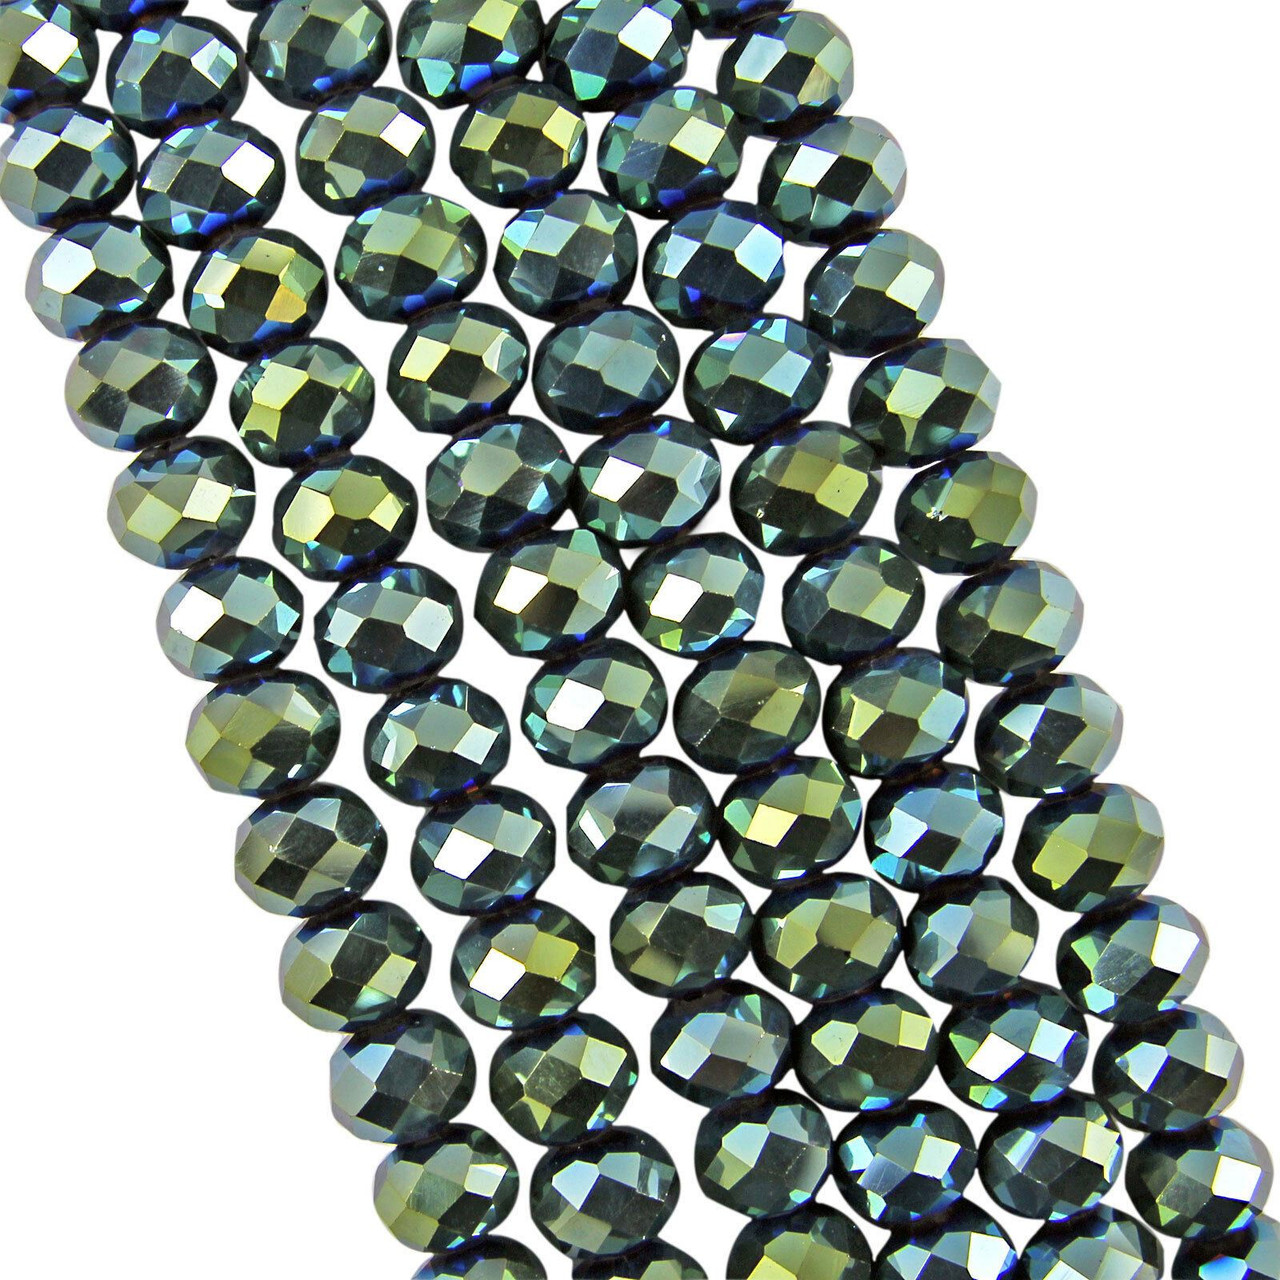 Green Metallic 8x6mm Faceted Glass Rondelles